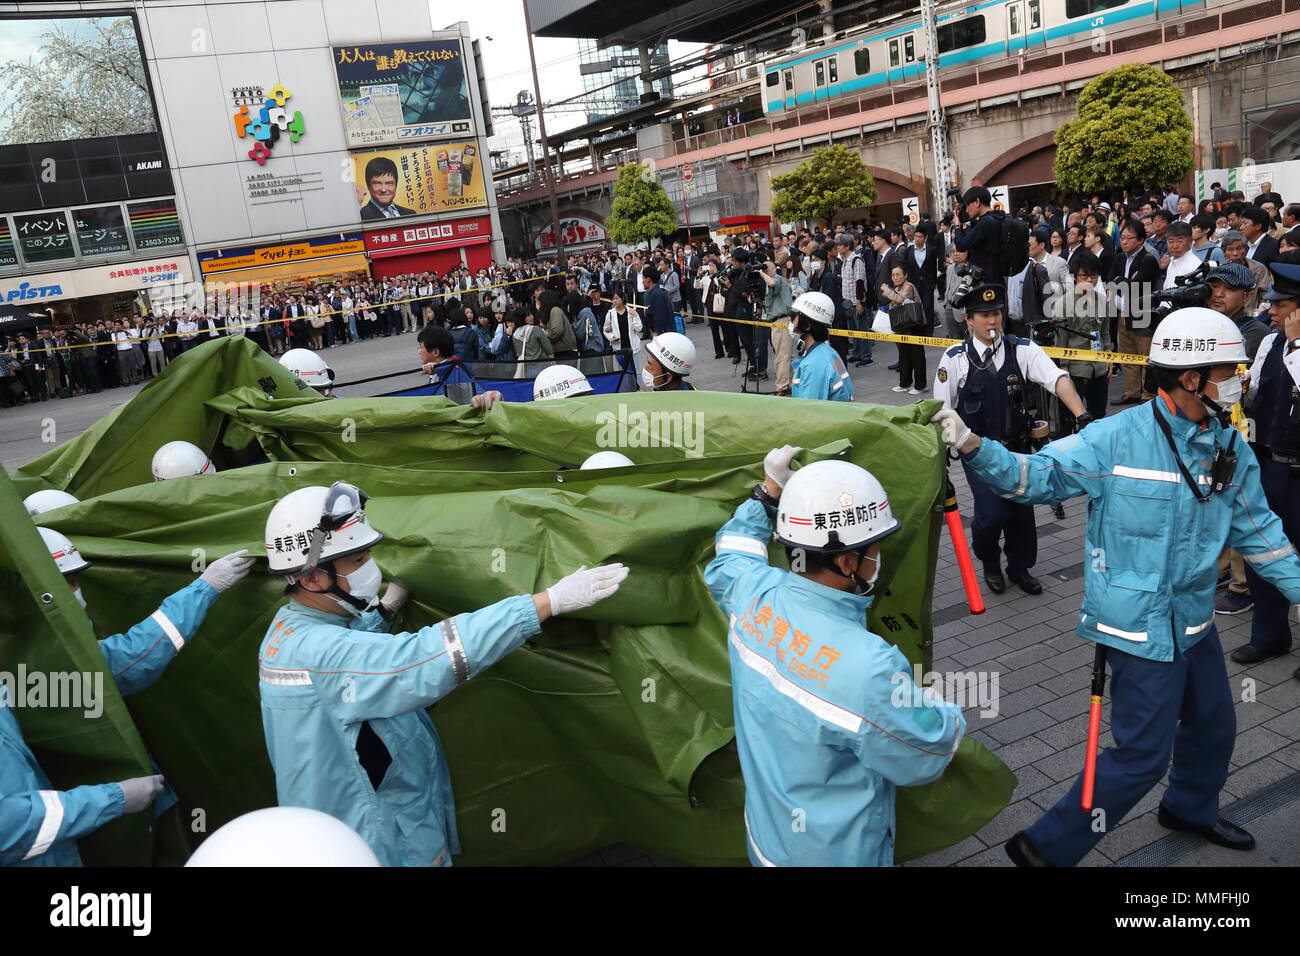 7 High School Girls Receives First Aid After They Fainted At Sl Square In Front Of Shinbashi Station In Tokyo Japan On May 11 18 Credit Motoo Naka Aflo Alamy Live News Stock Photo